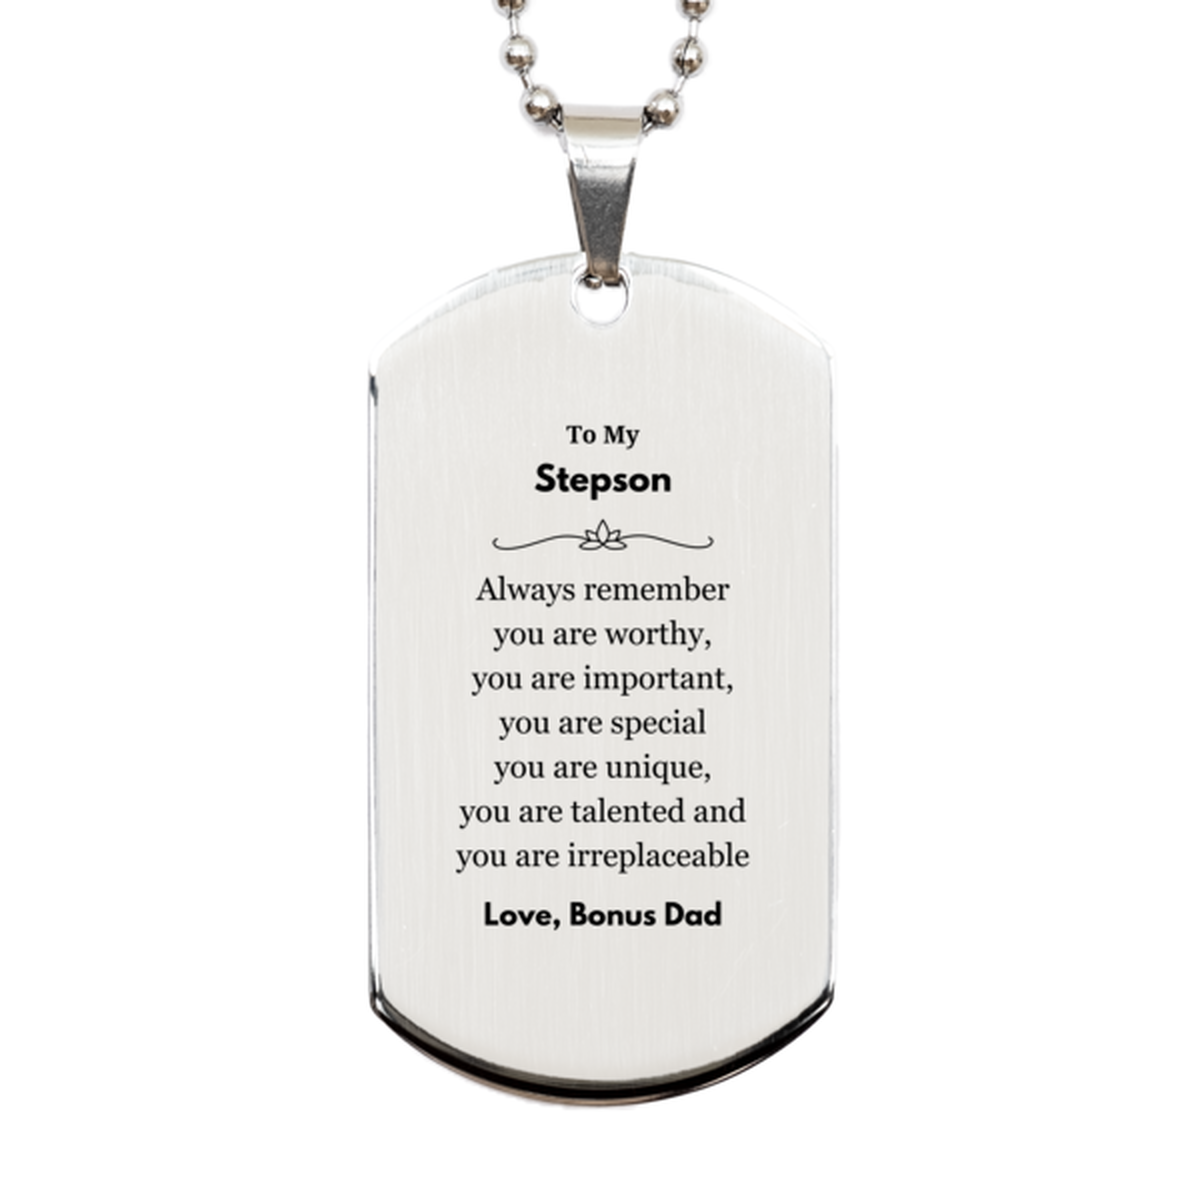 Stepson Birthday Gifts from Bonus Dad, Inspirational Silver Dog Tag for Stepson Christmas Graduation Gifts for Stepson Always remember you are worthy, you are important. Love, Bonus Dad